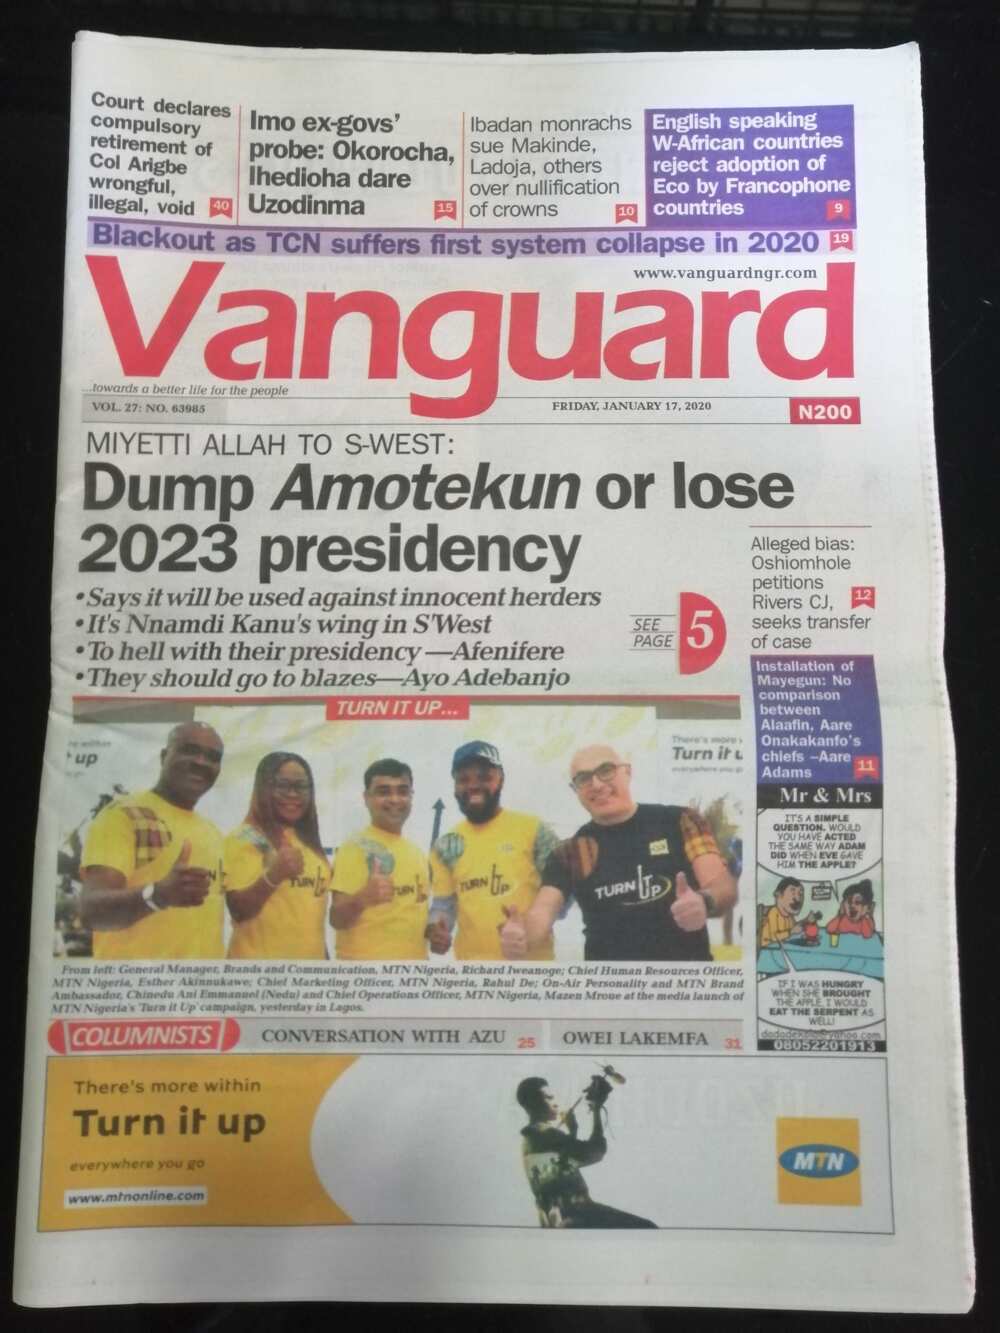 Newspaper review for Friday, January 17: Amotekun aligns with Buhari's security vision - Fayemi